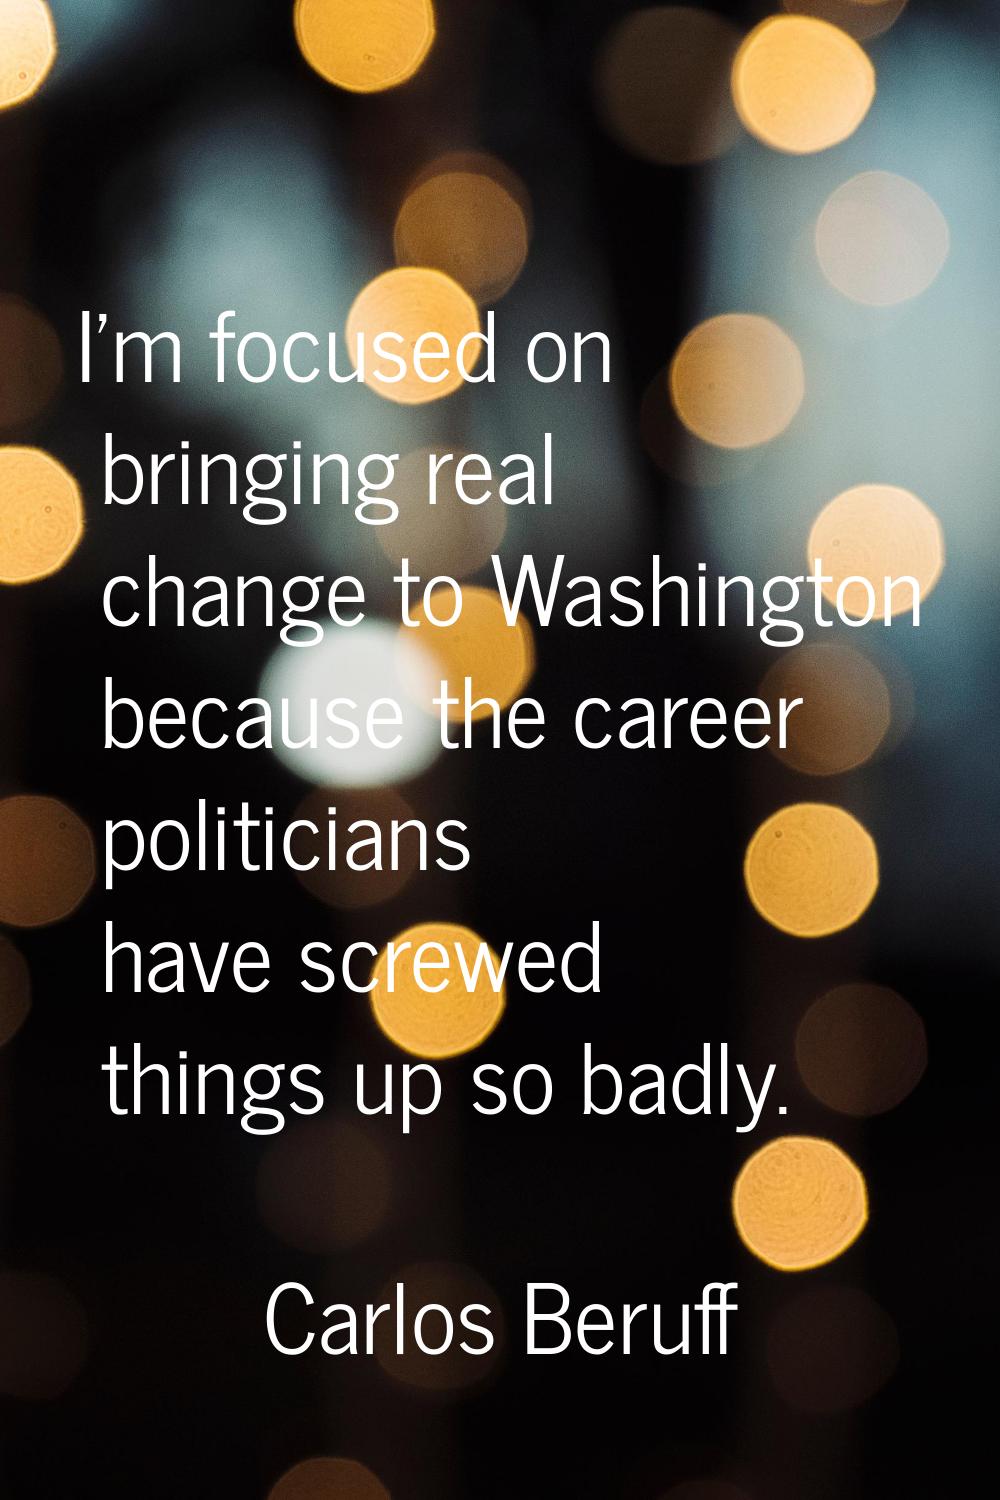 I'm focused on bringing real change to Washington because the career politicians have screwed thing